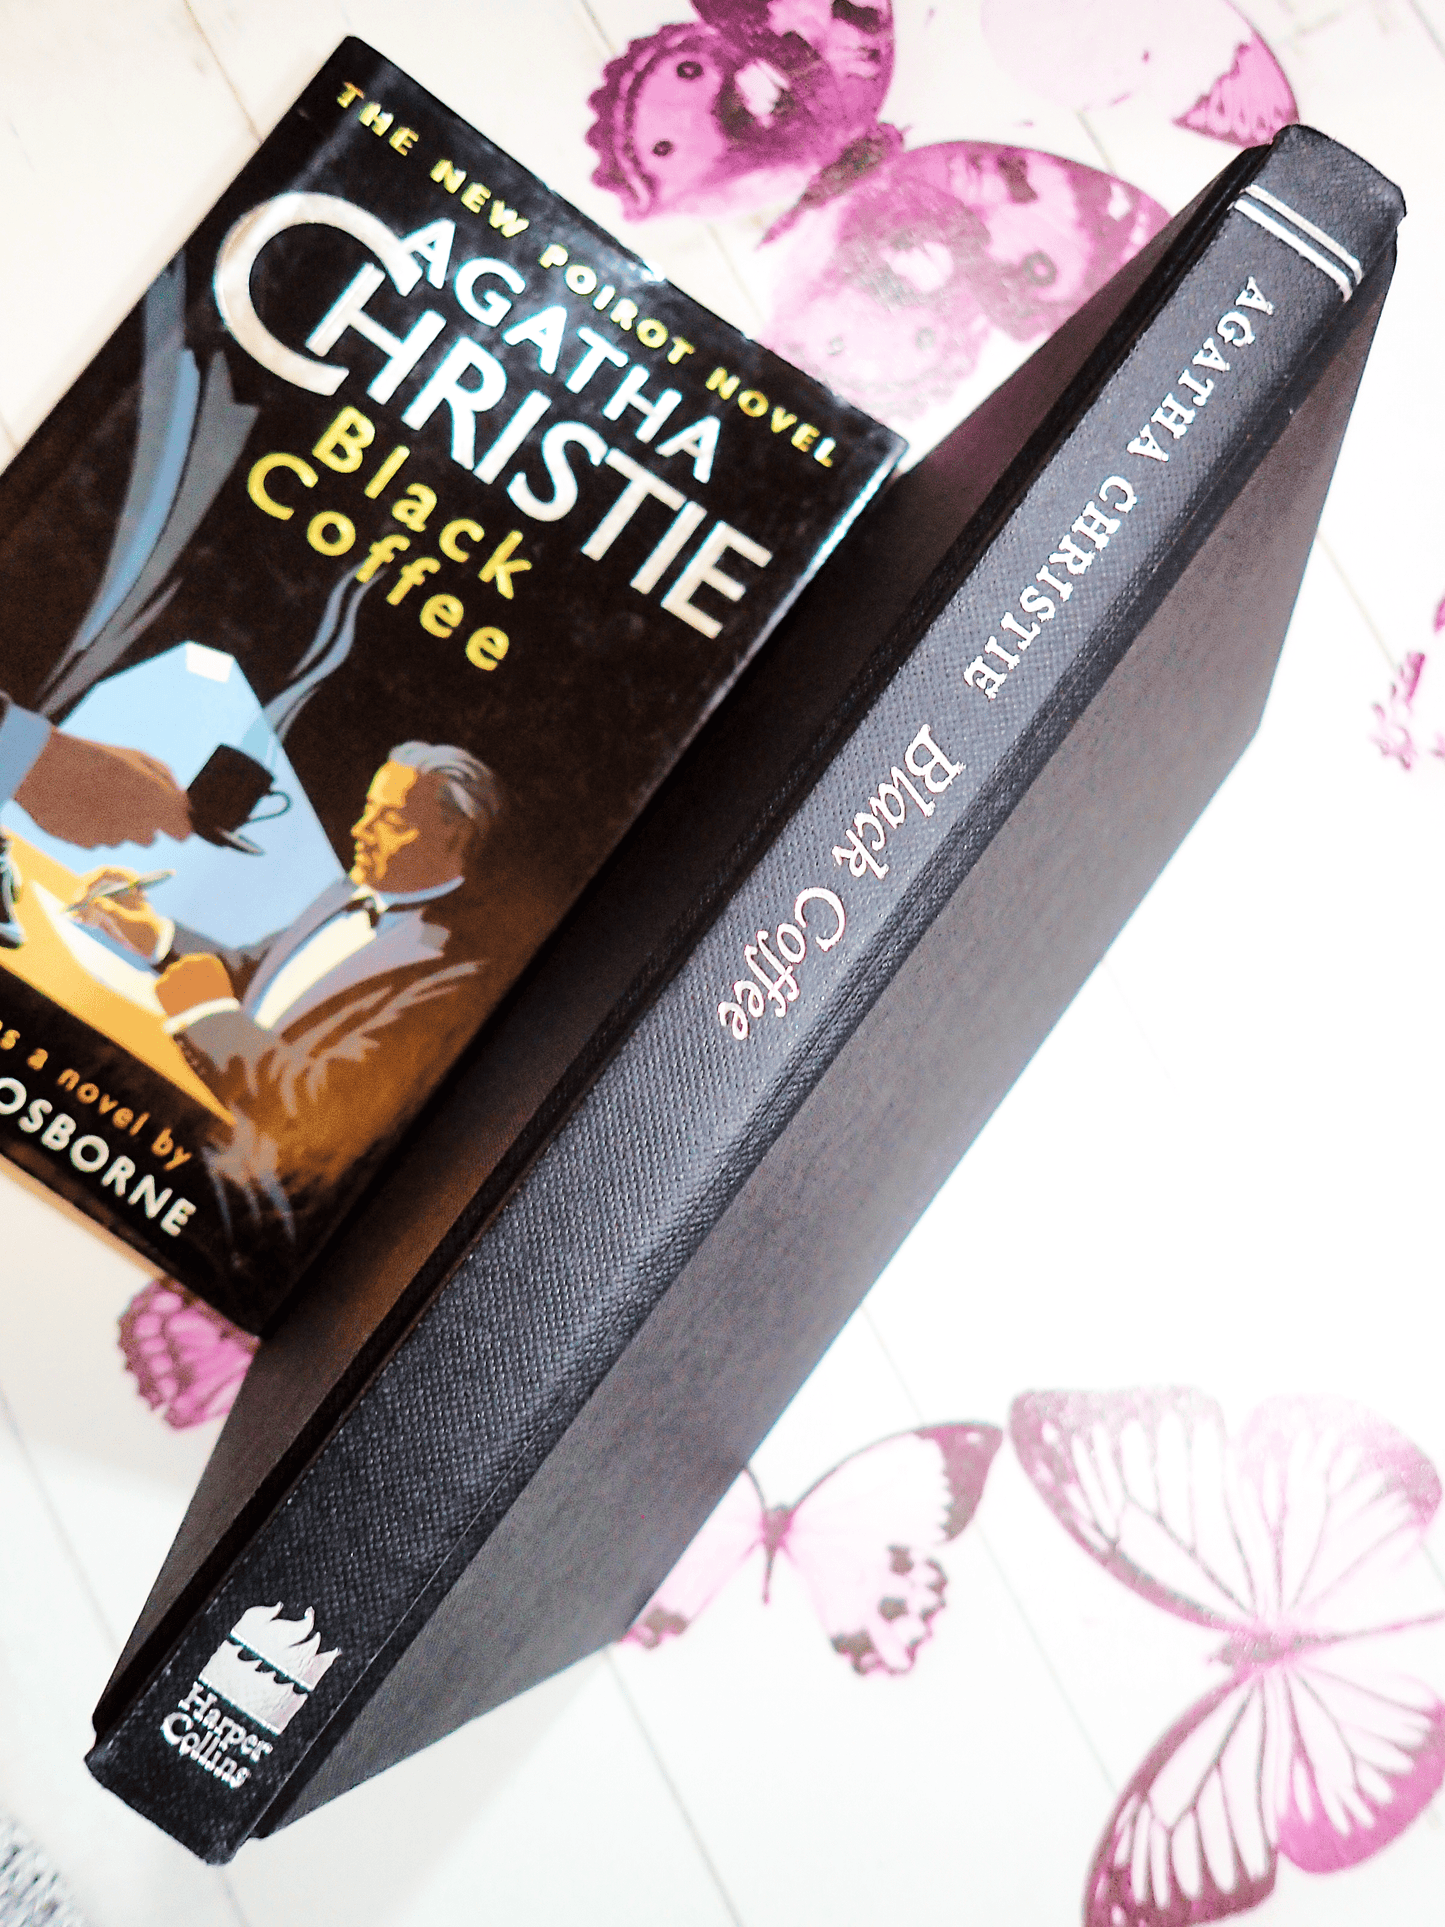 Spine of Agatha Christie Black Coffee Vintage Book Poirot Play Adapted by Charles Osborne with silver titles on black boards with the dust jacket next to it. 